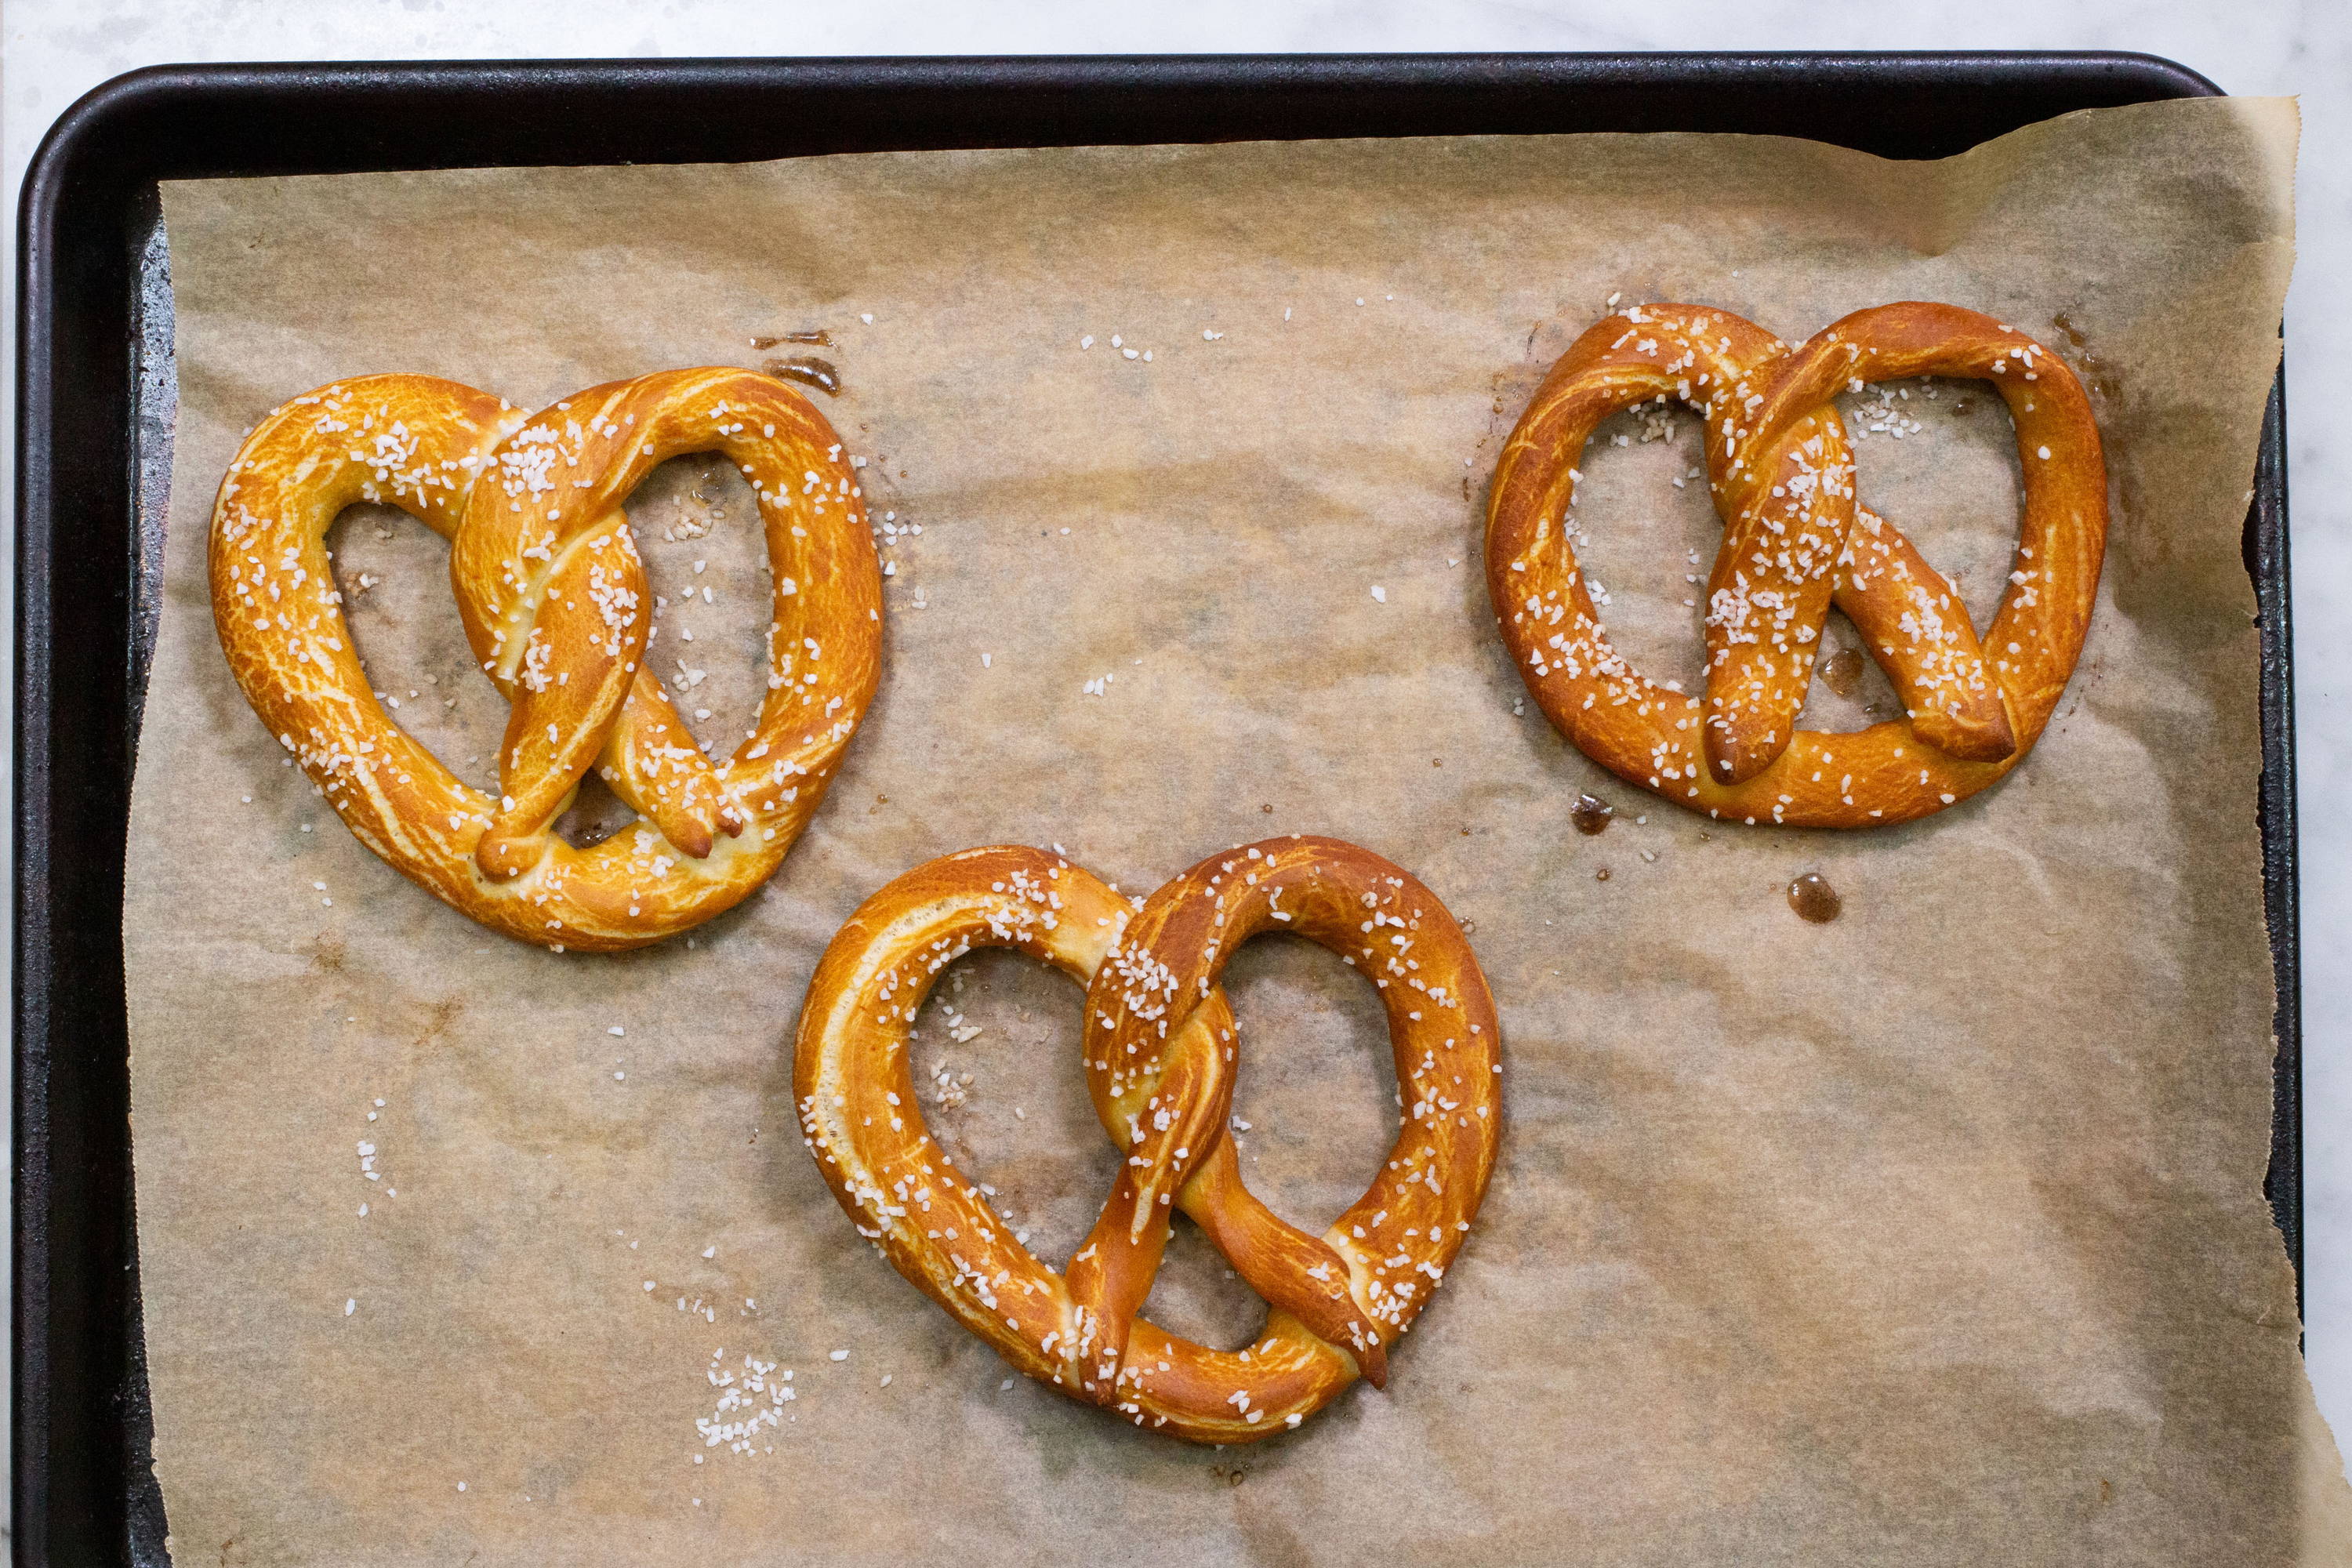 Fresh out of the oven - How to make pretzels